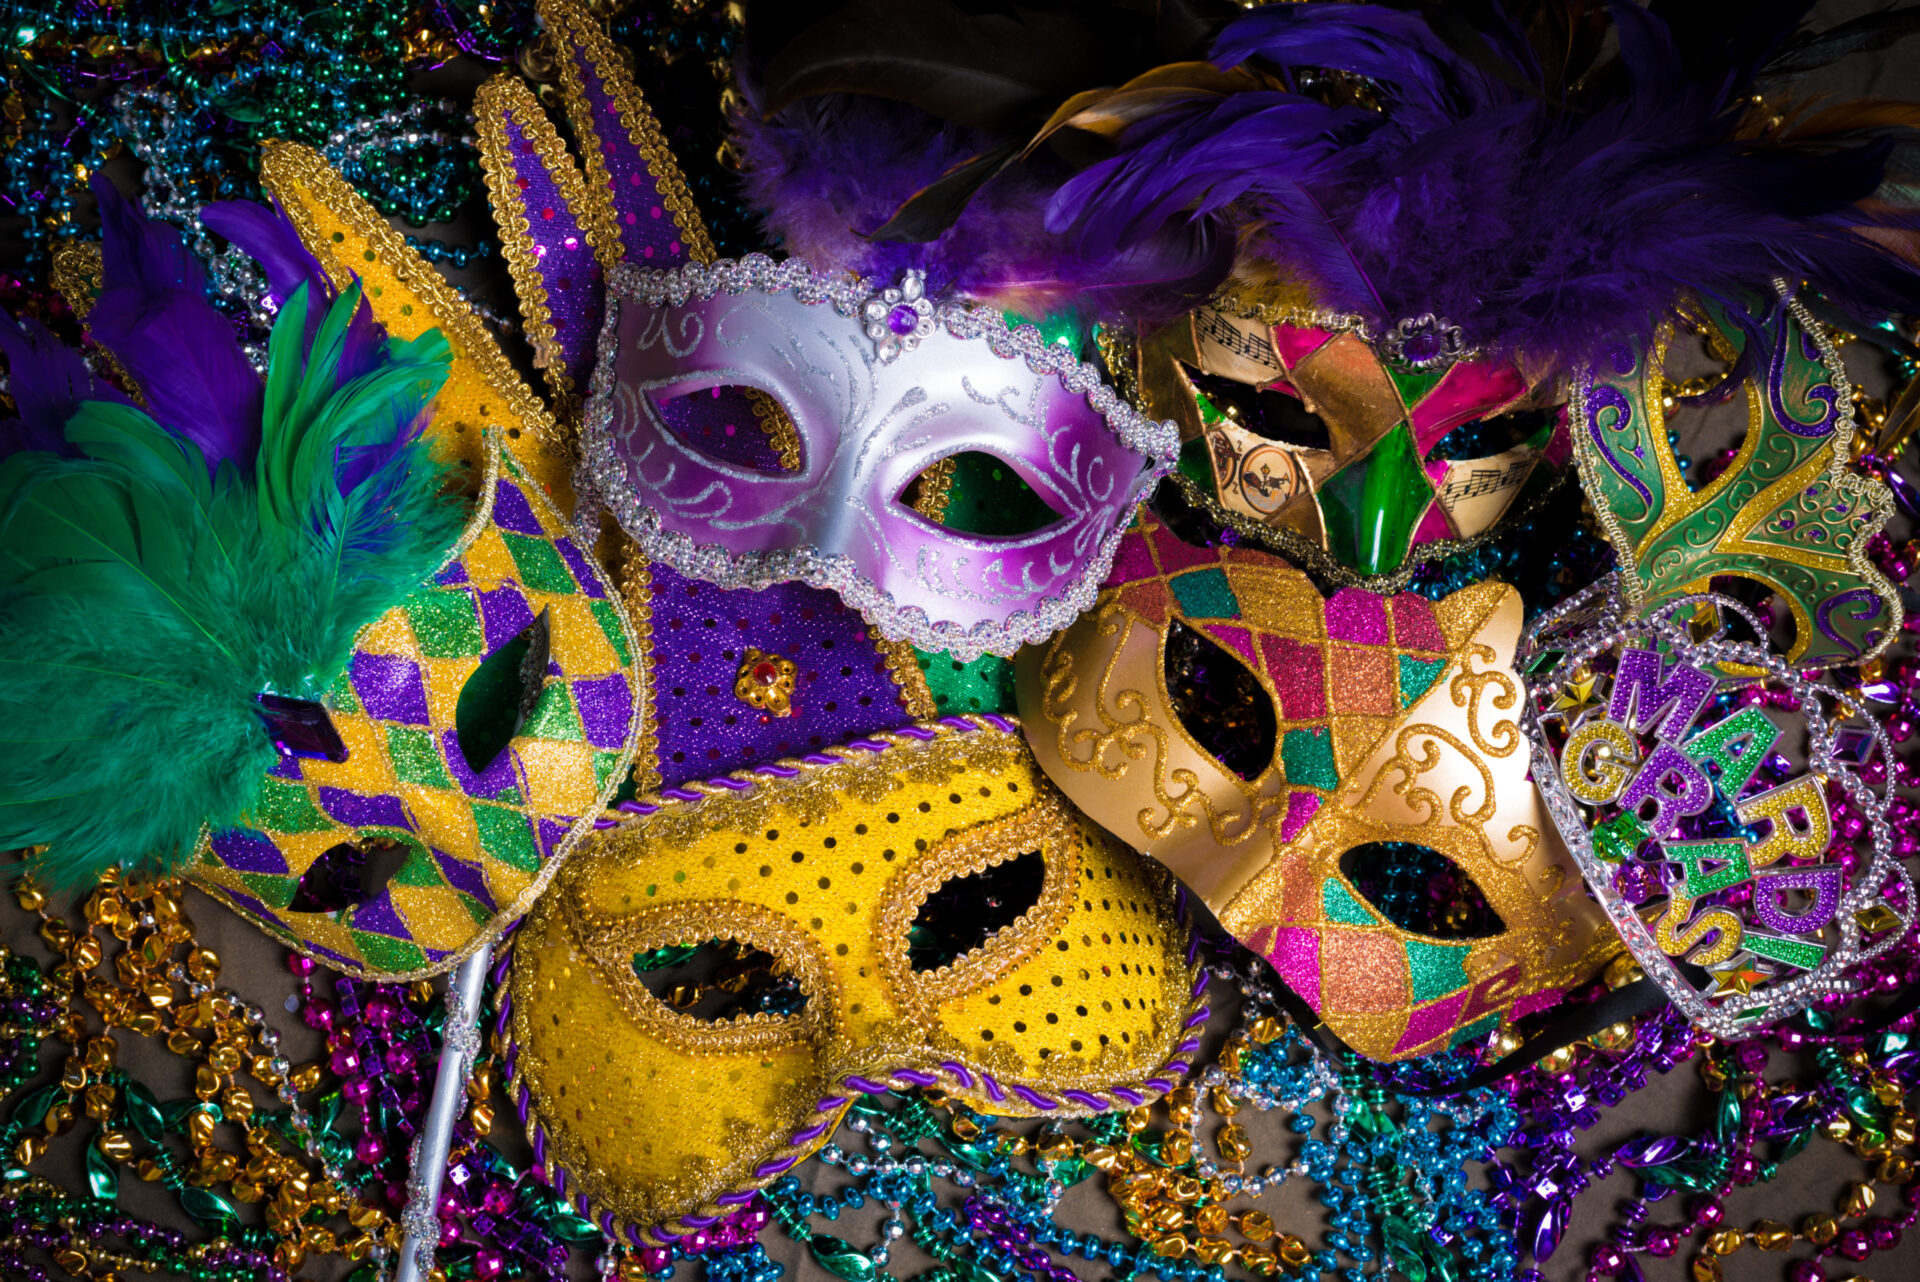 OS/OW Restrictions for Mardi Gras